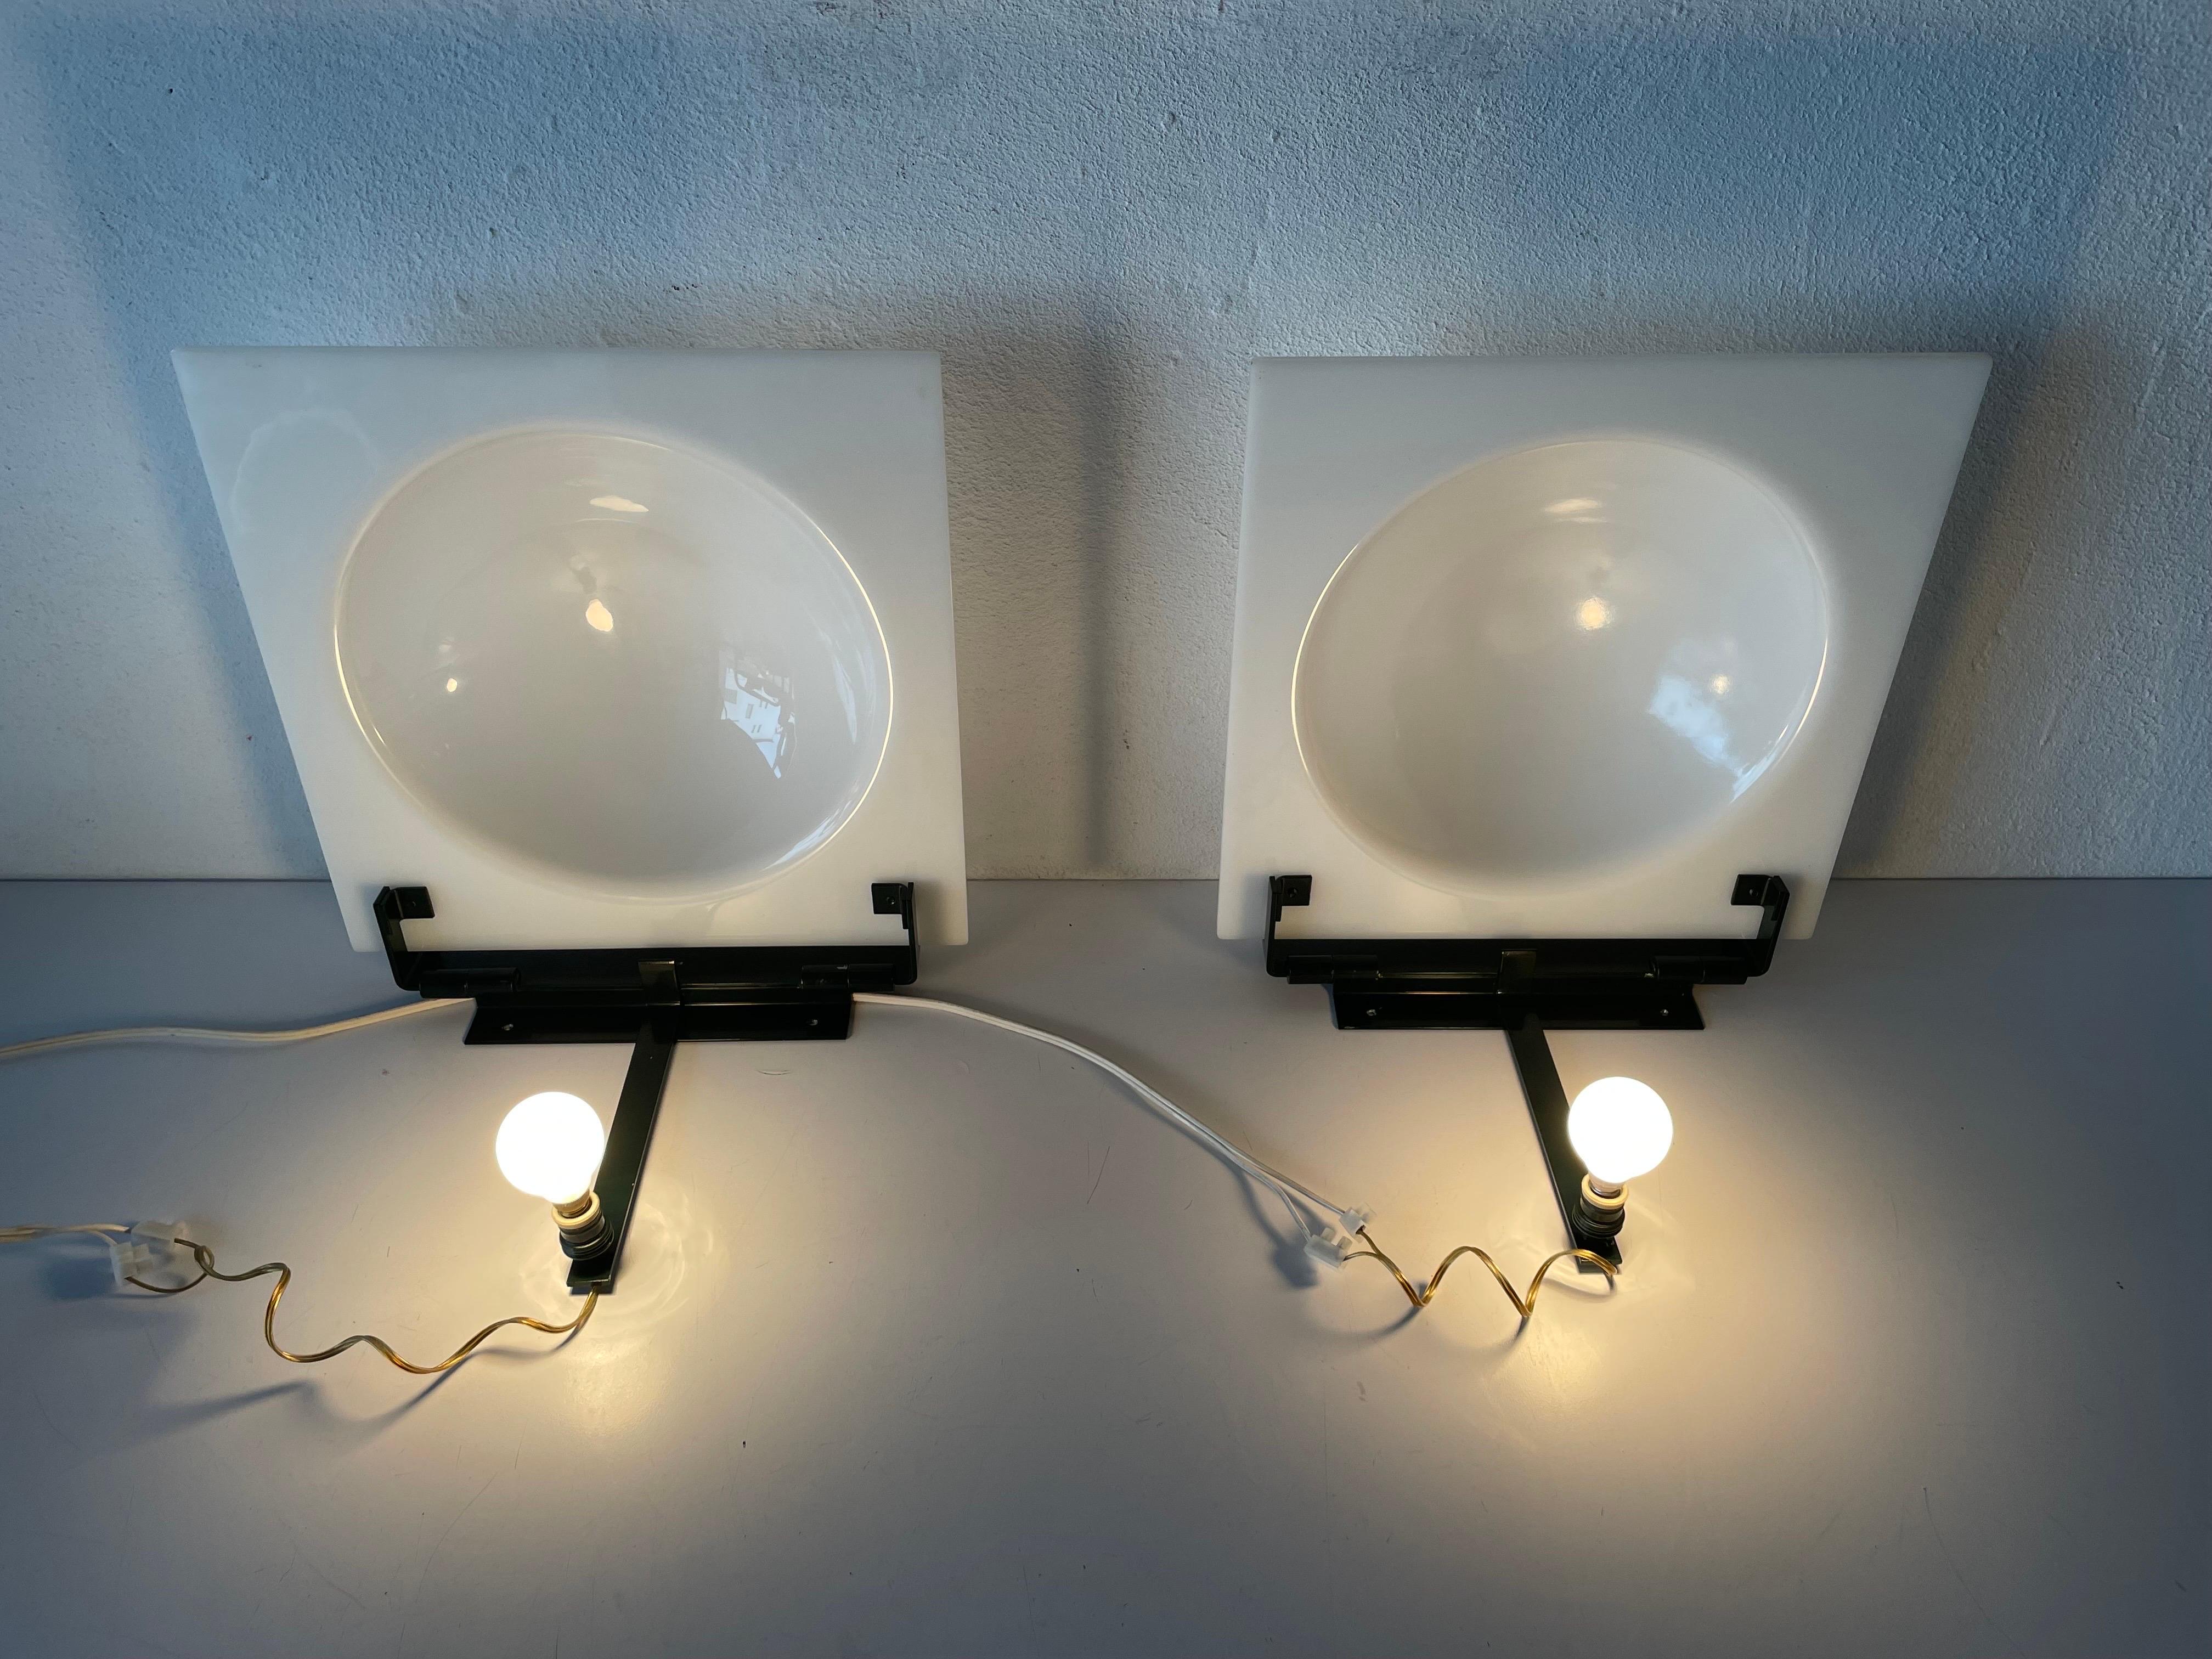 High Quality Plexiglass Bubble Design Pair of Wall Lamps, 1960s, Italy For Sale 10